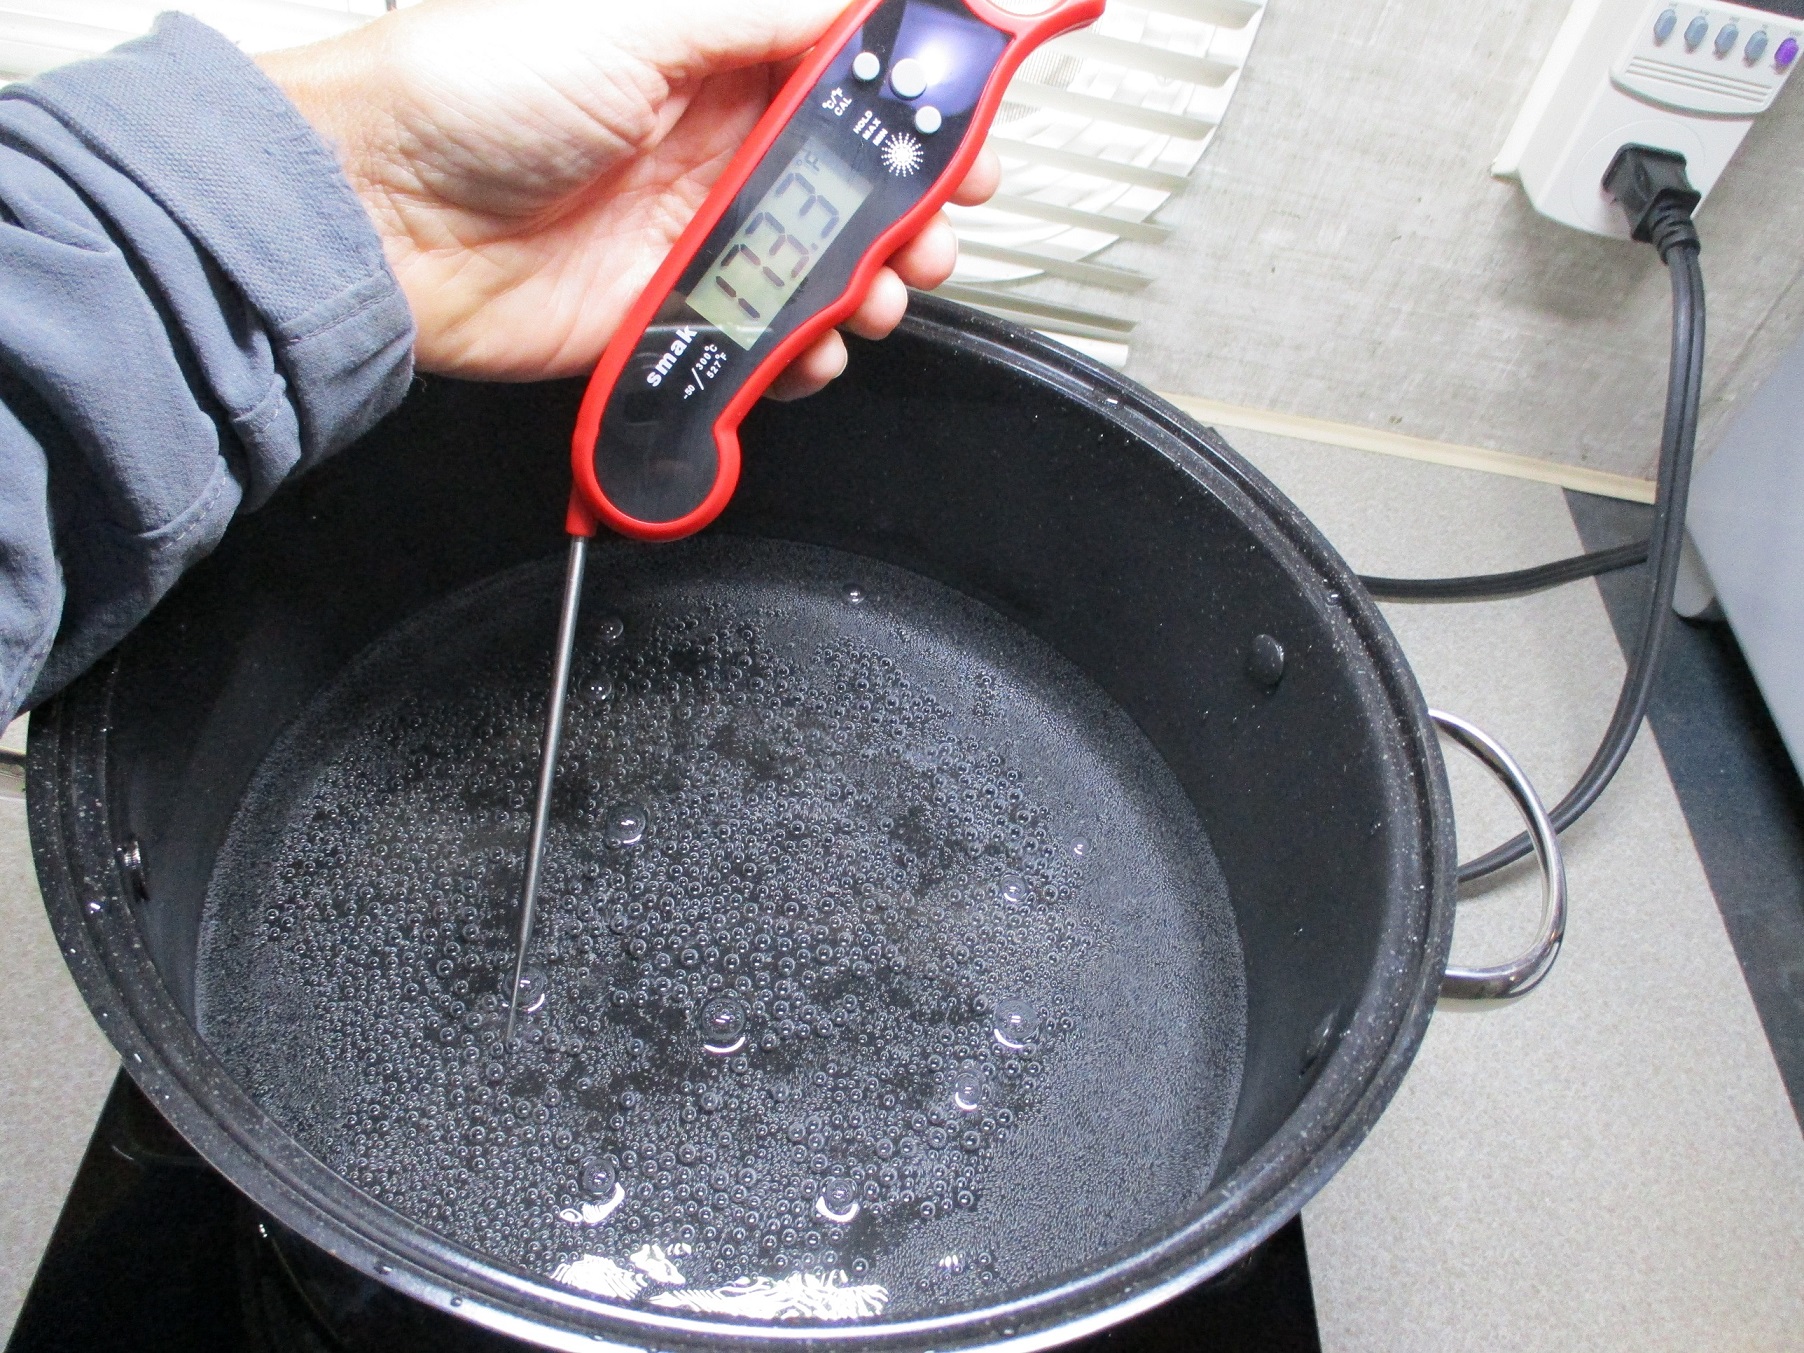 Water boiling tests - All-Electric Project